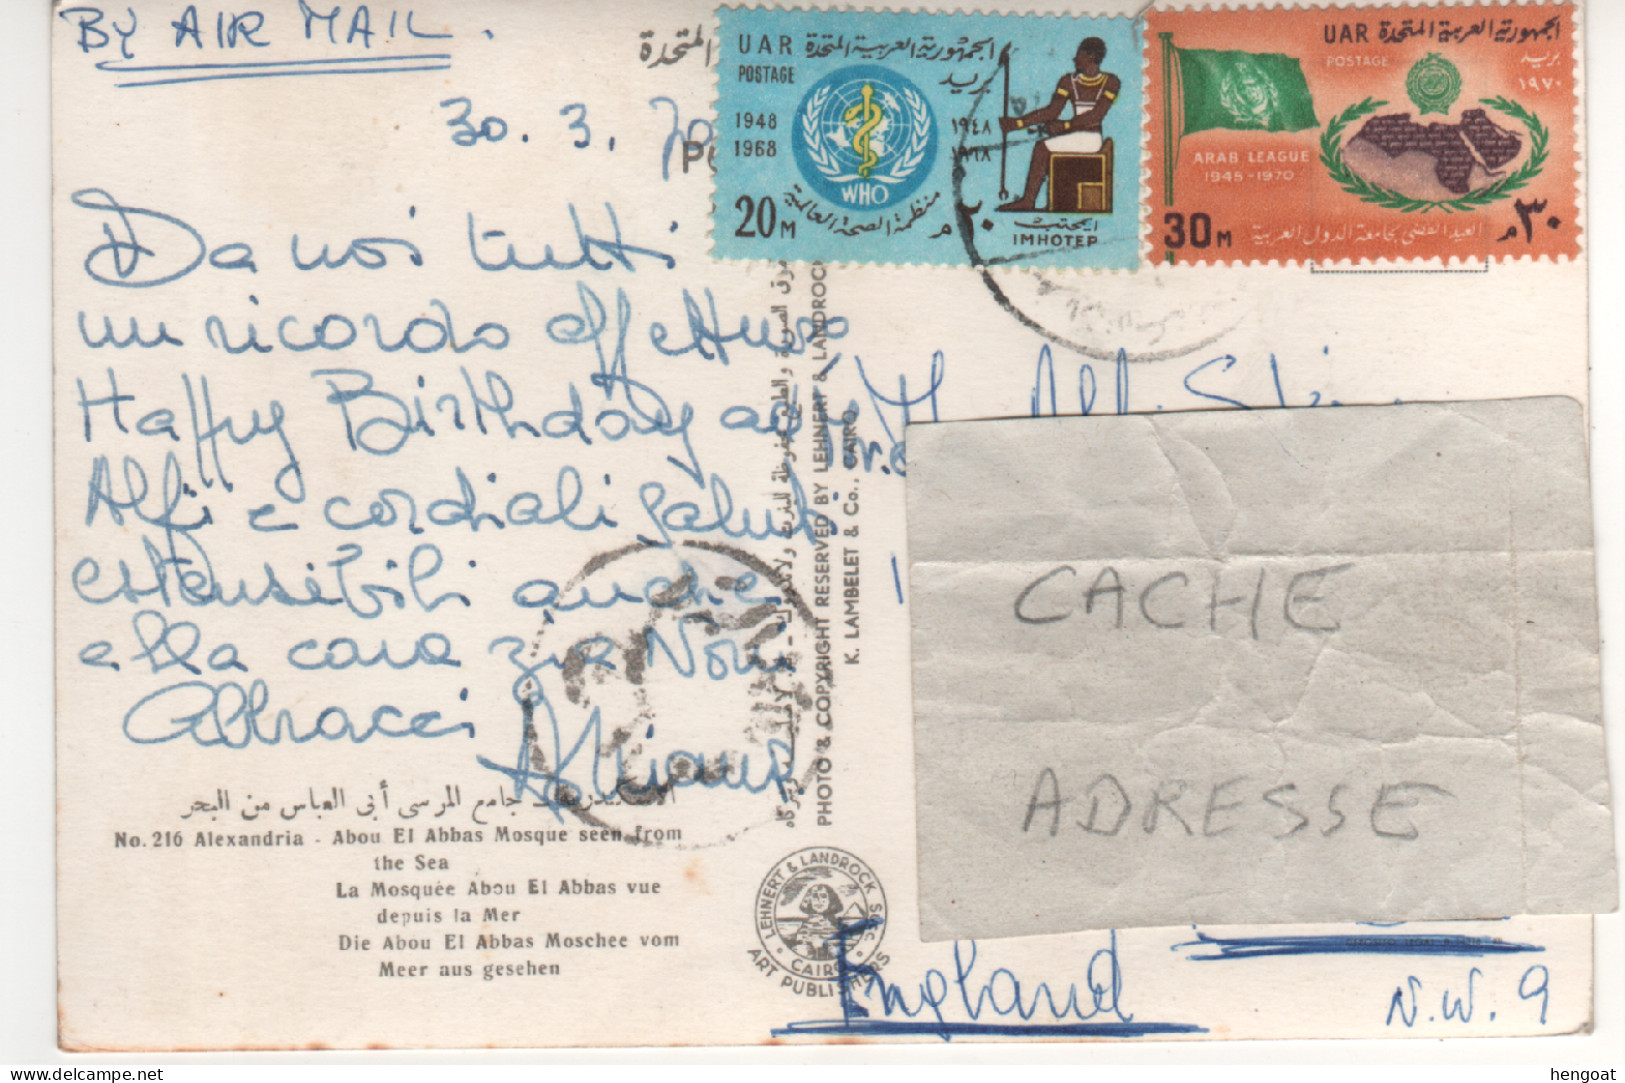 Timbres , Stamps " 1948 -1968 WHO , Imhotep ; 1945 - 1970 Ligue Arabe " Sur CP , Carte , Postcard Du 30/03/70 - Covers & Documents